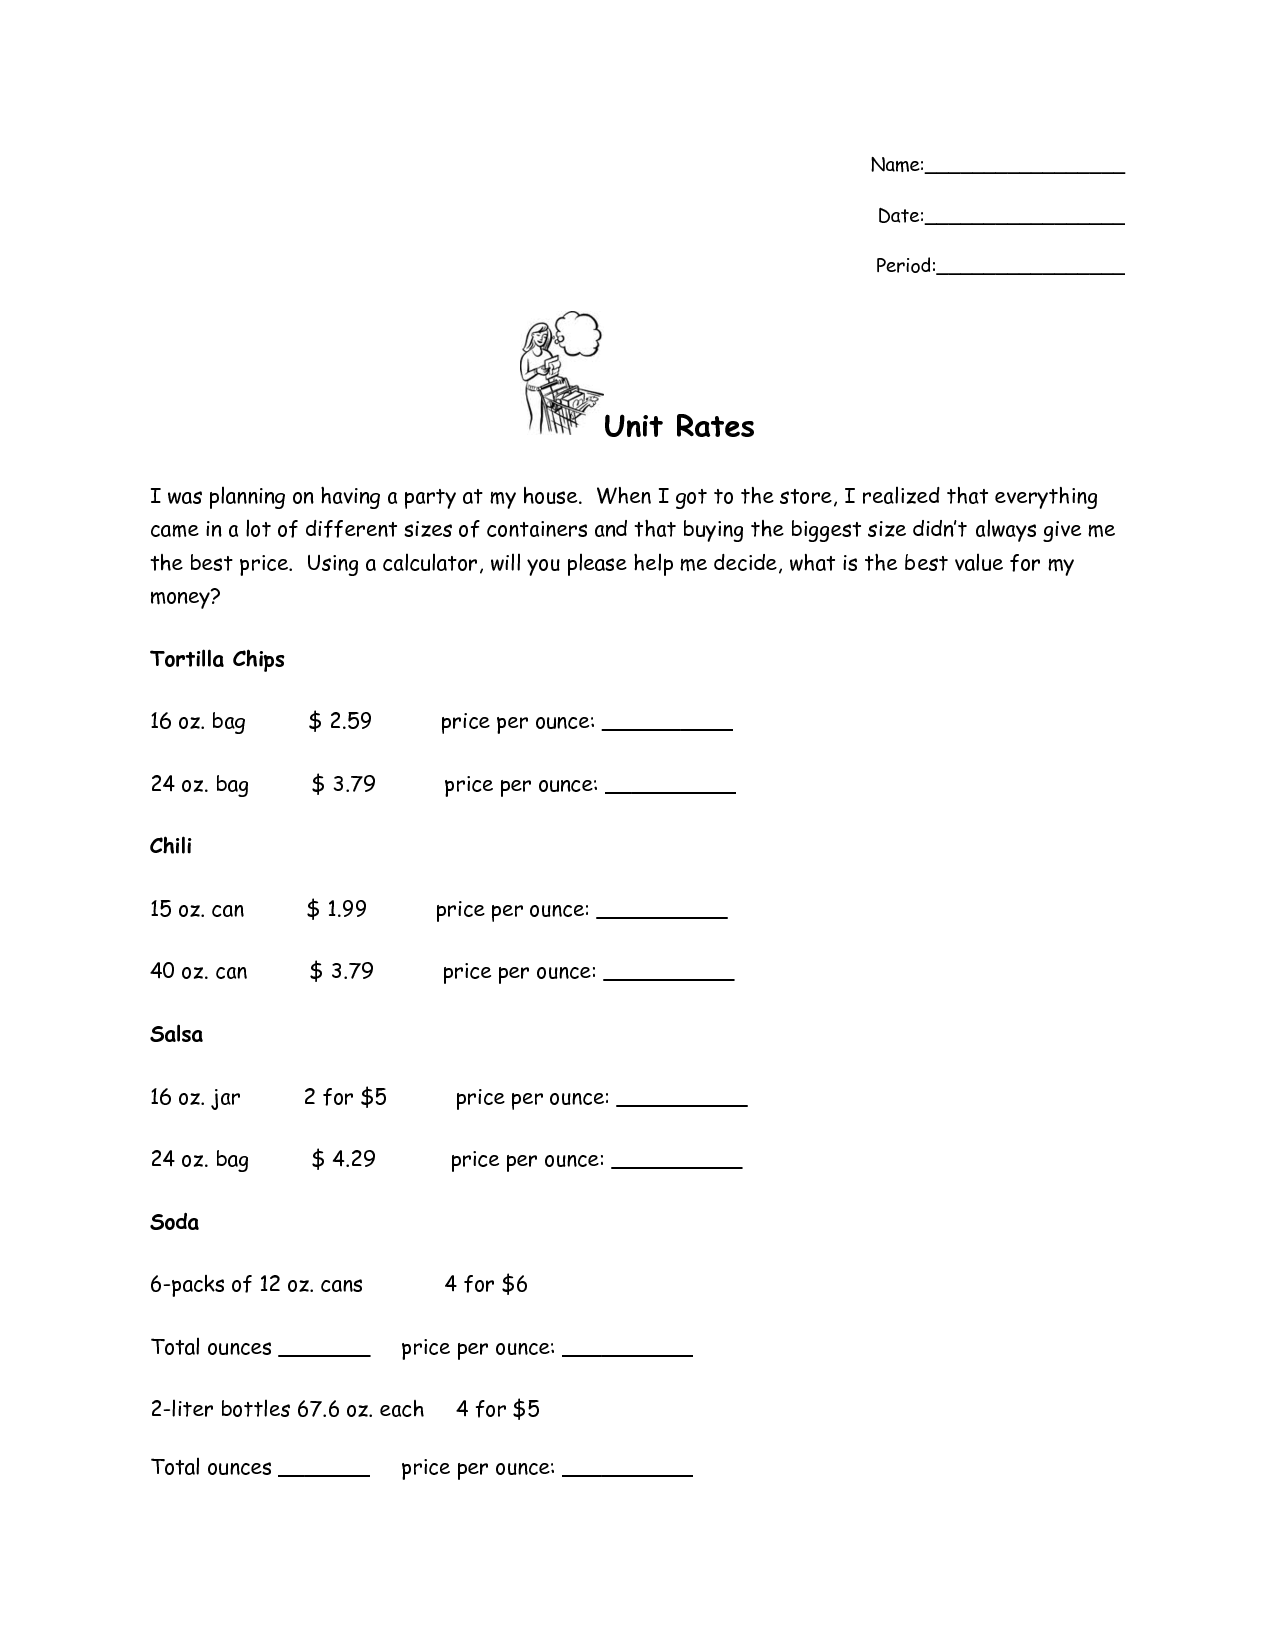 22 Best Images of Unit Rate Worksheets 22th Grade Unit Rates With Unit Rate Worksheet 7th Grade